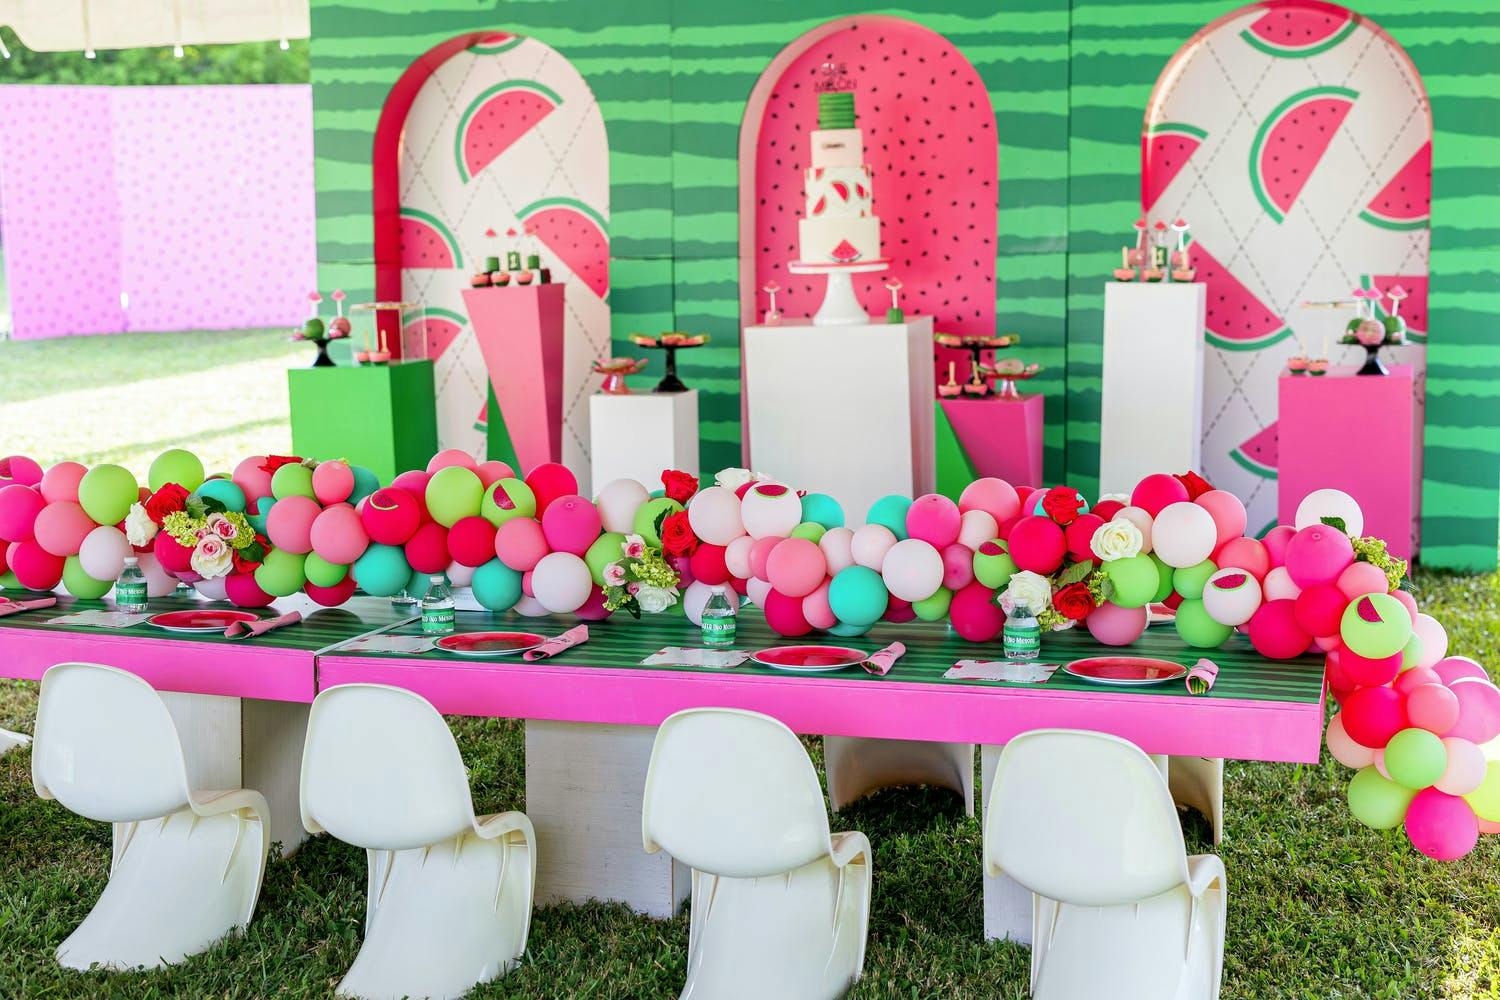 Birthday Decoration Ideas For Home: Let Your Creativity Shine